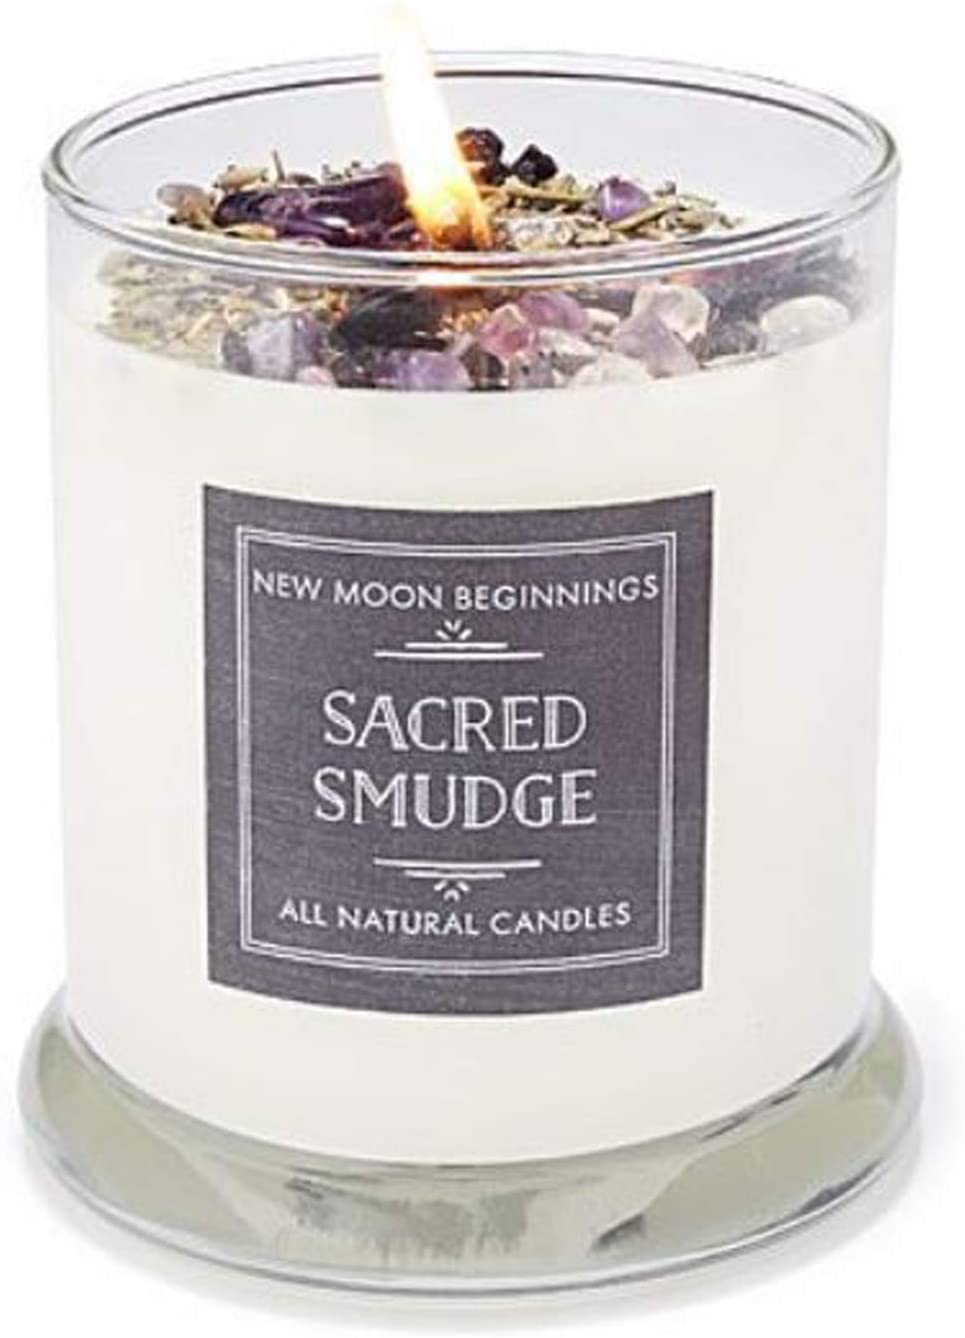 Sacred Smudge New Moon Beginnings Aromatherapy Candle